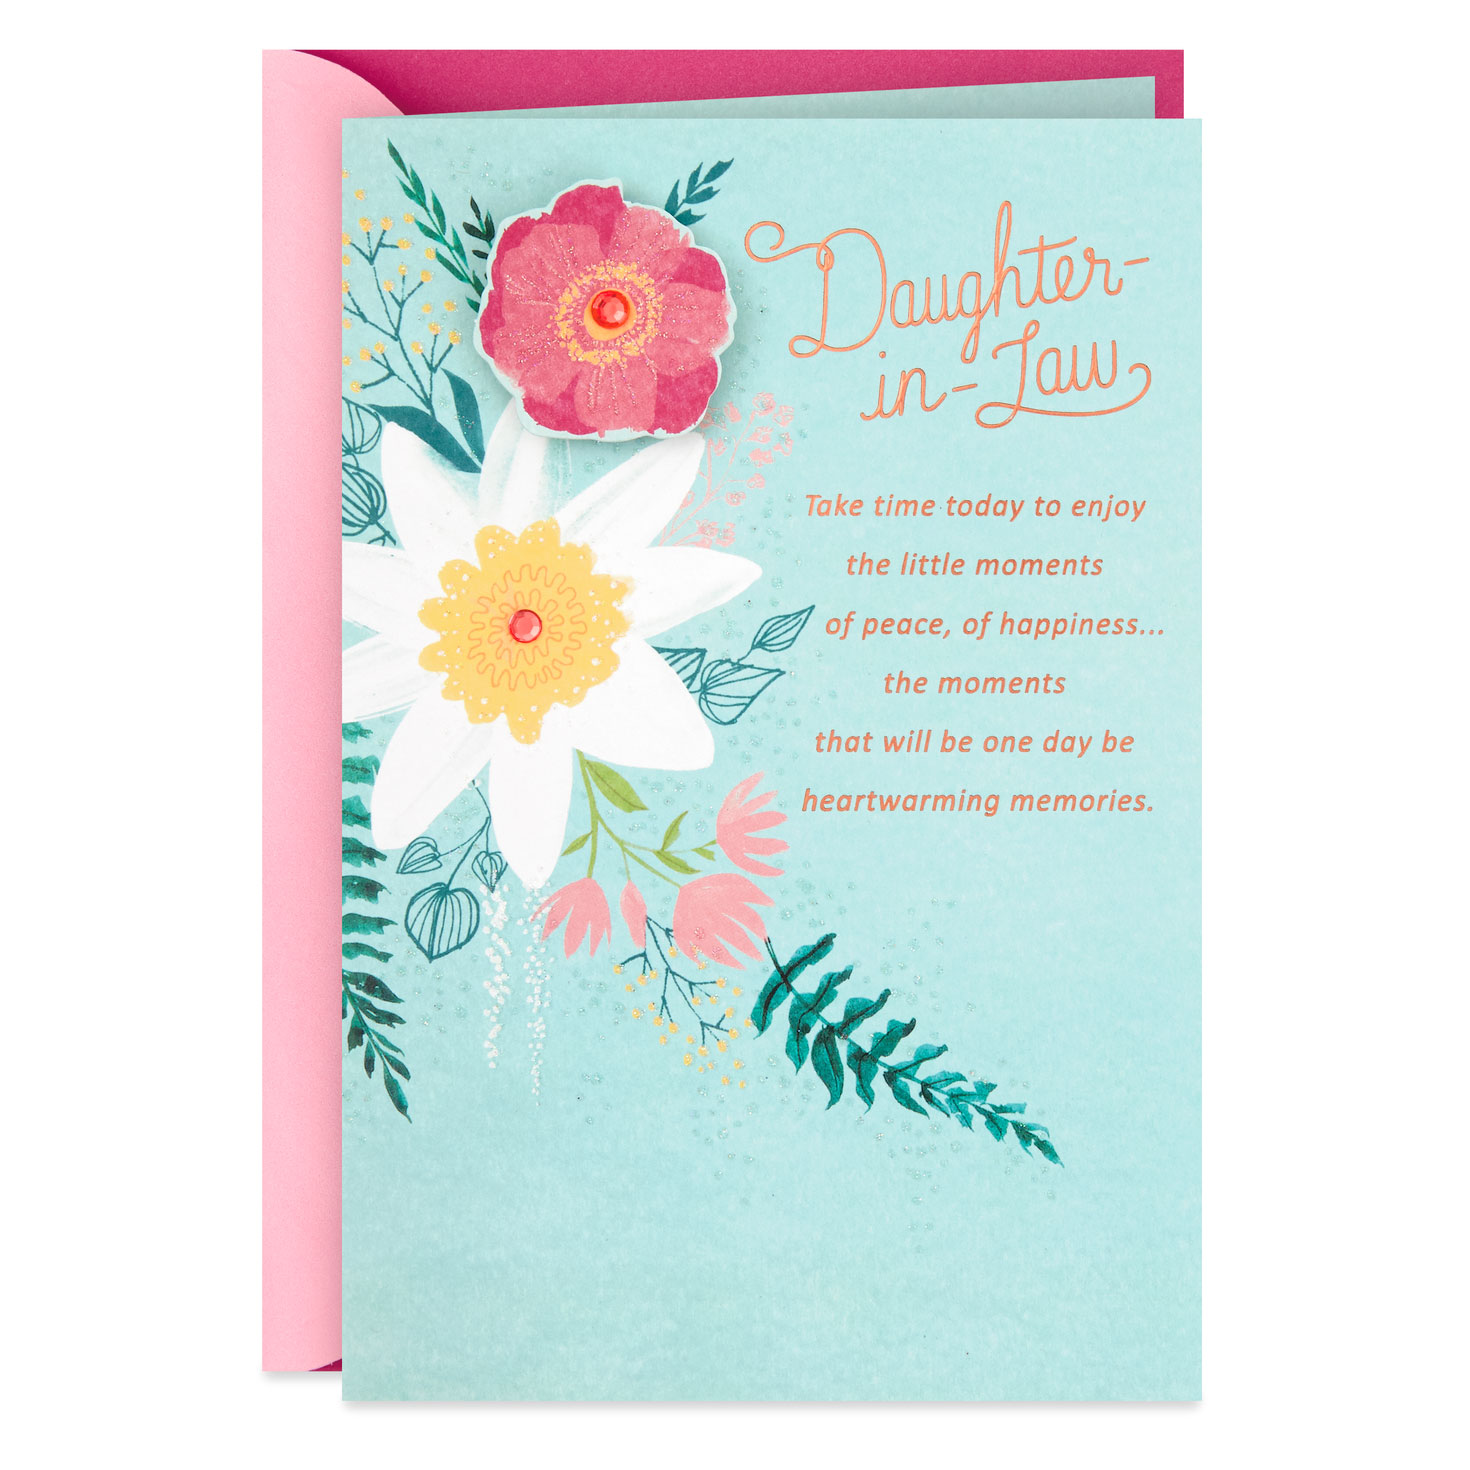 Day Card for Daughter-in-Law 